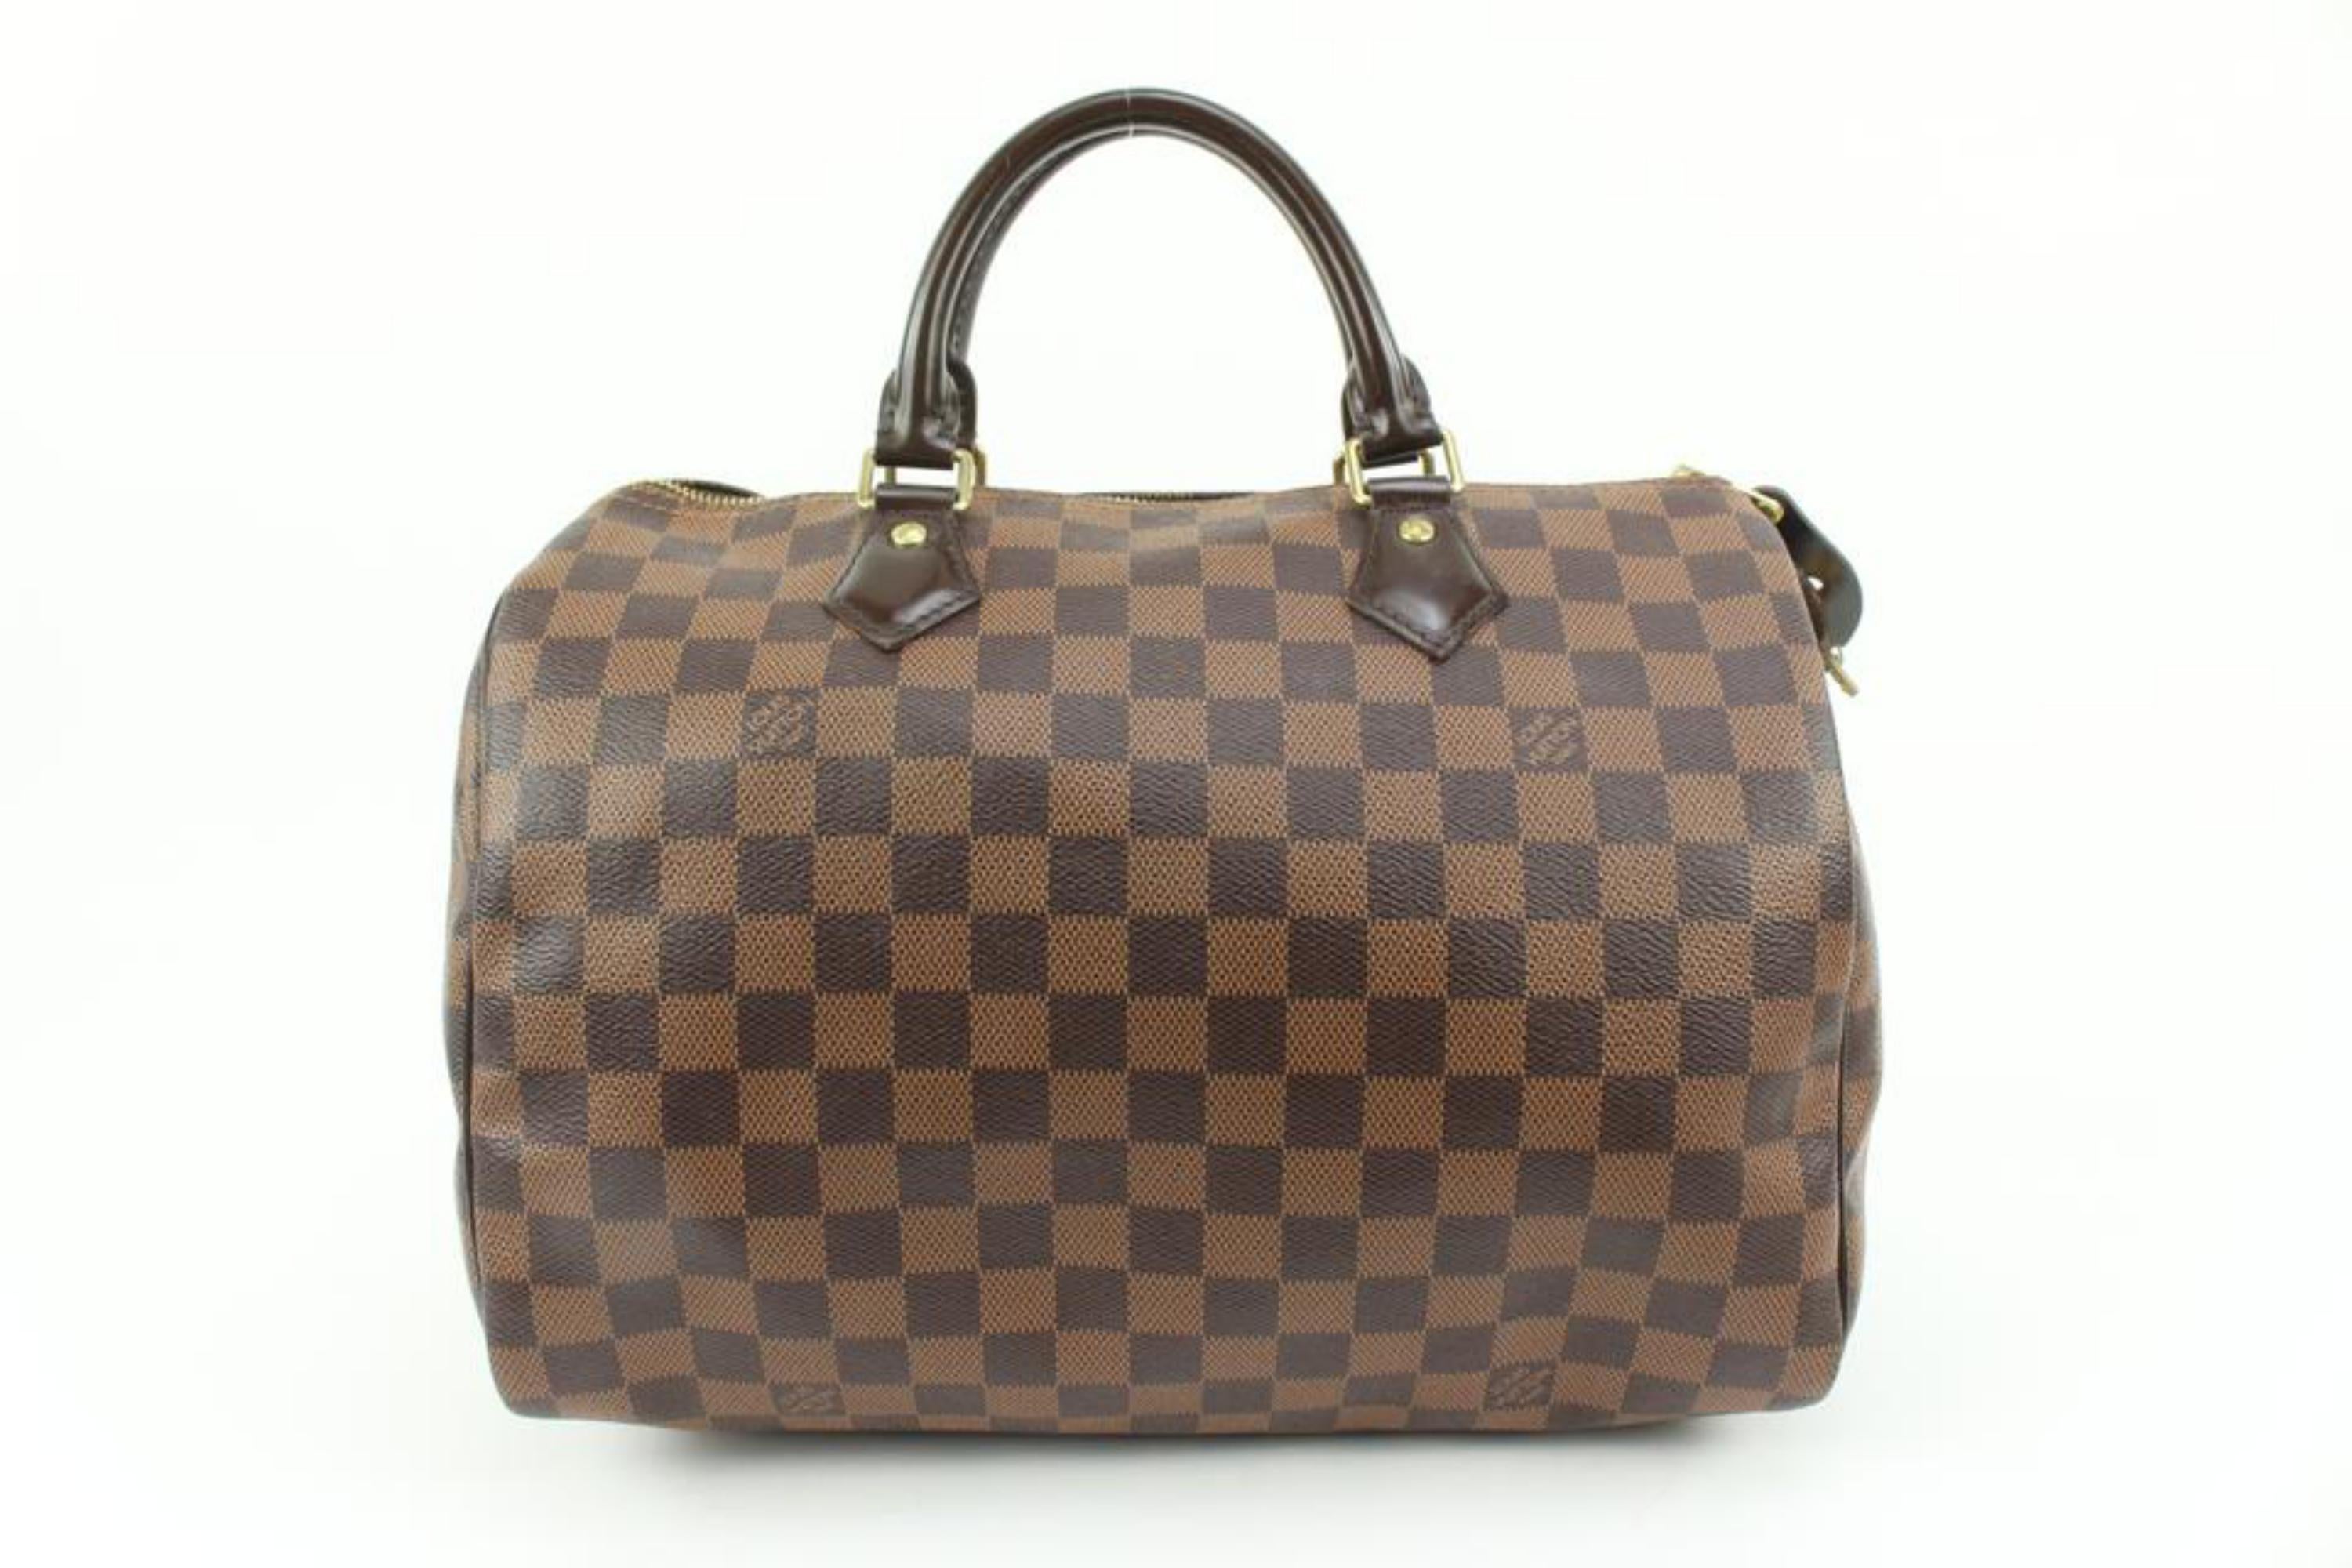 Louis Vuitton Damier Ebene Speedy 30 Boston Bag MM 93lk33s In Good Condition For Sale In Dix hills, NY